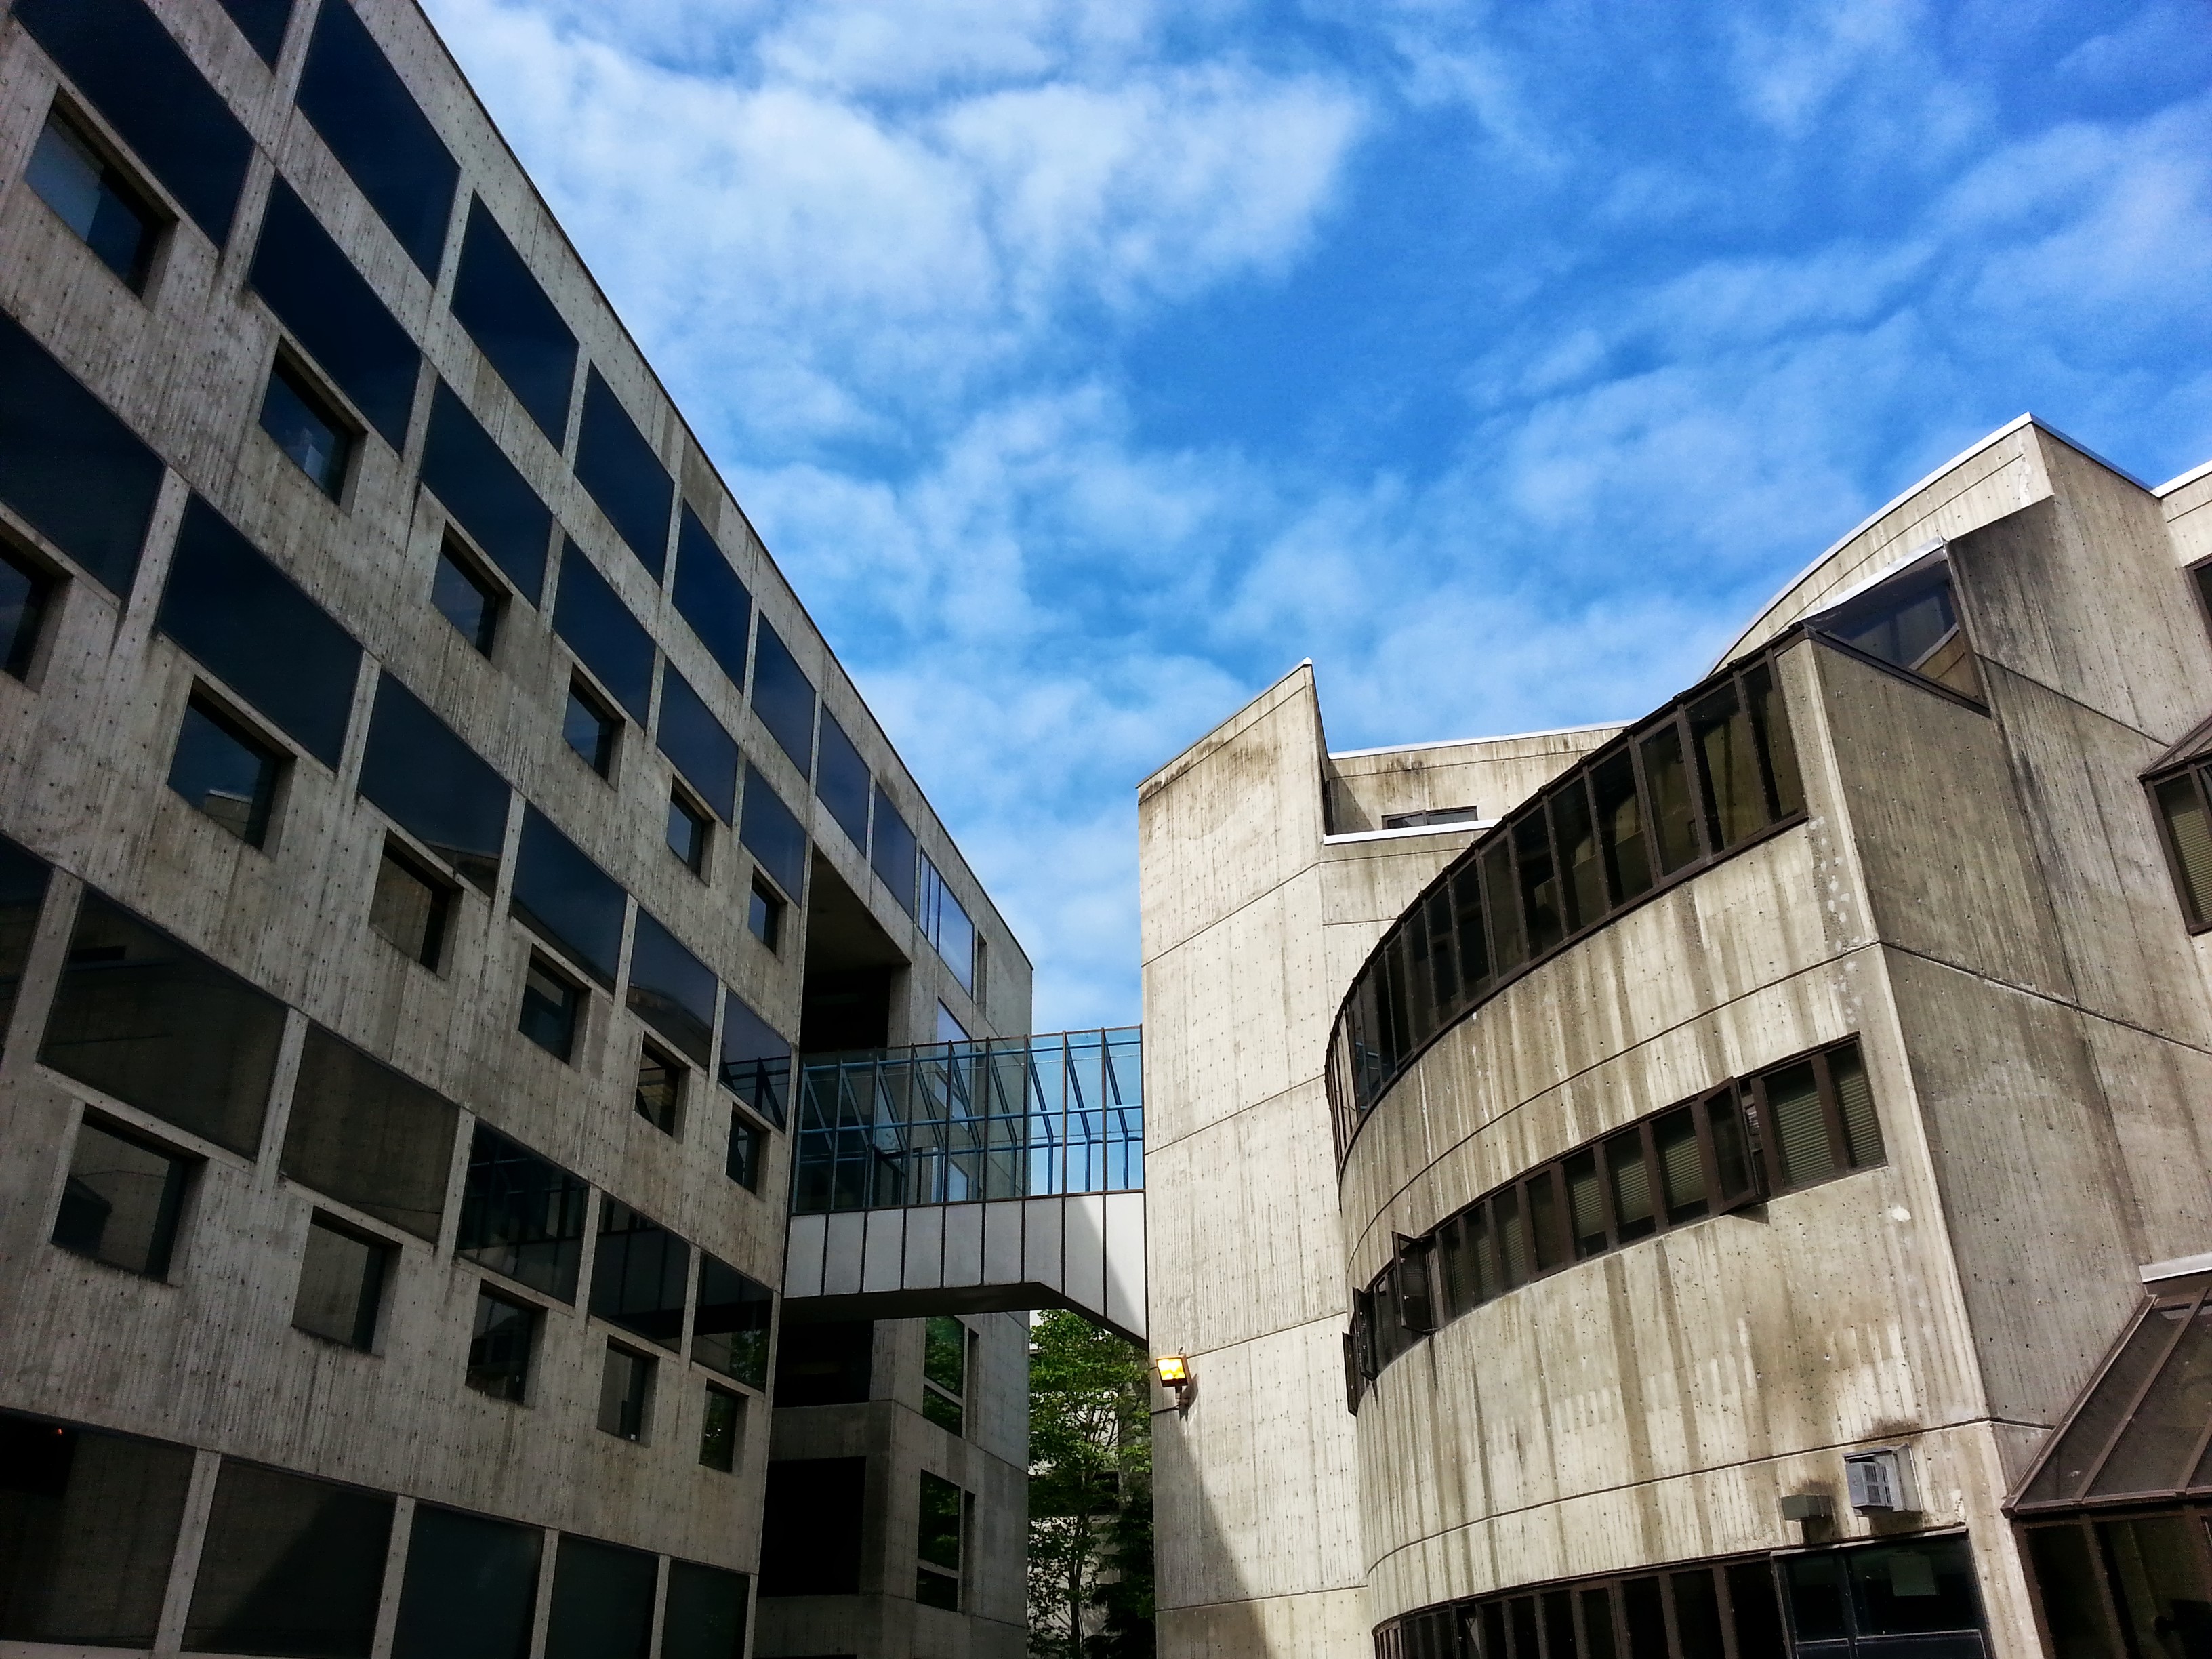 Looking up at the skybridge between the Environmental Studies building and Arntzen Hall. Blue sky and clouds above.